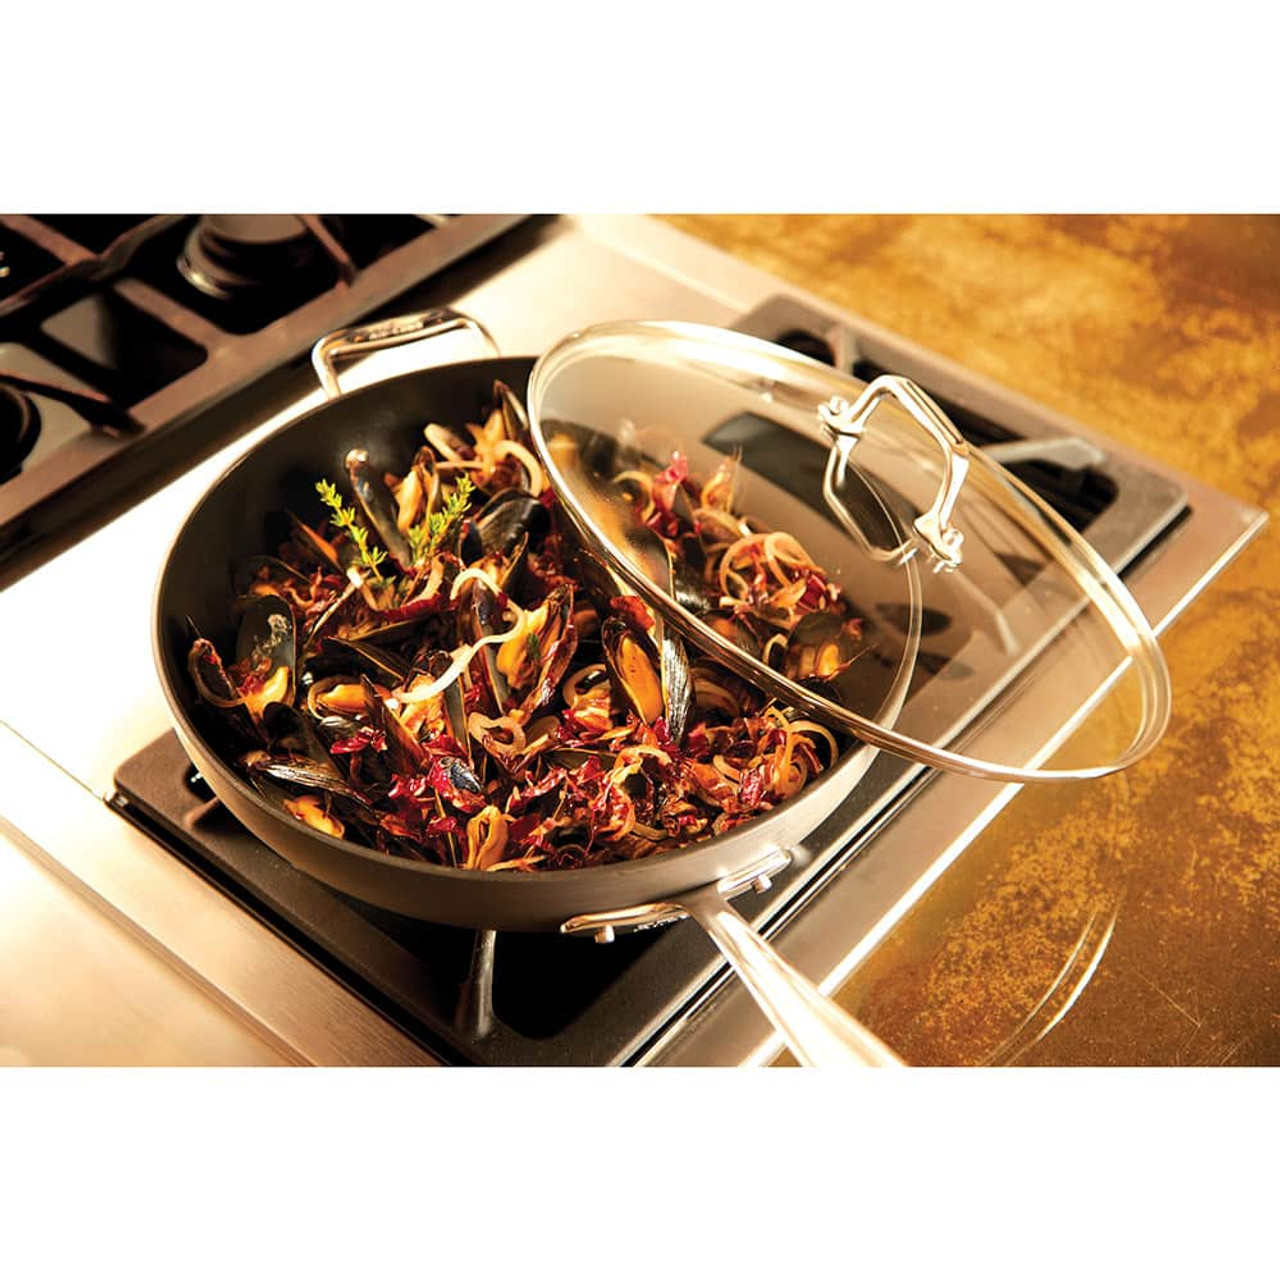 All-Clad HA1 8- and 10-inch Fry Pan Set